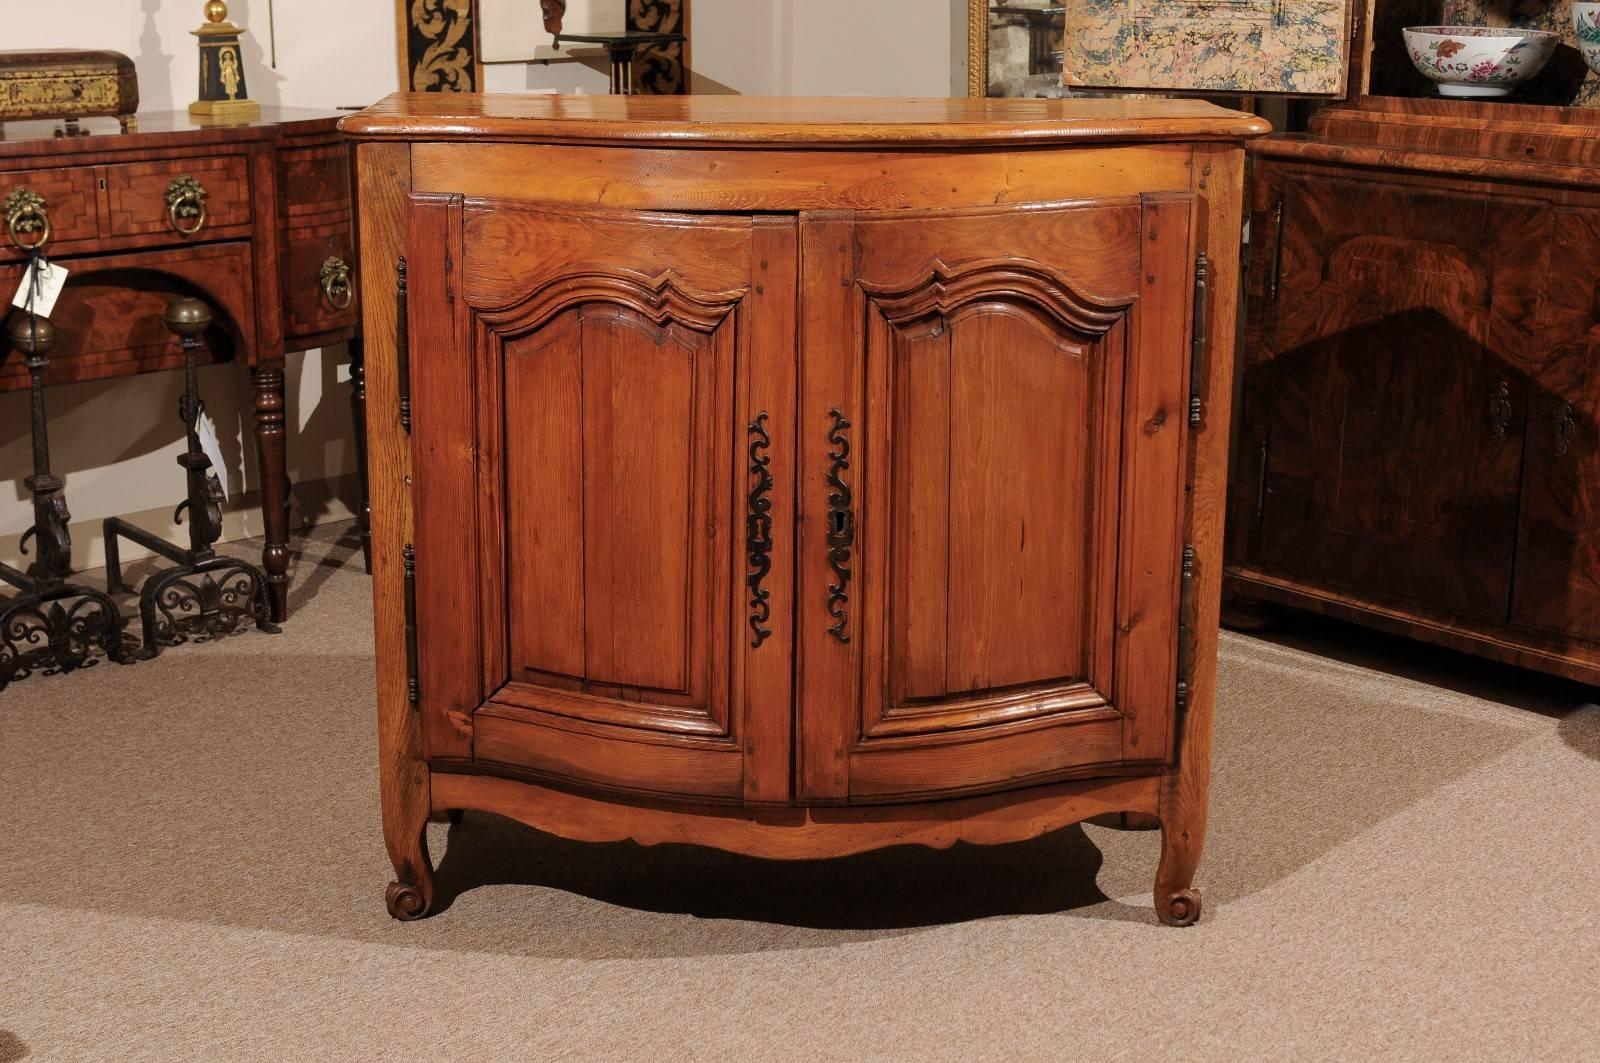 Louis XV style buffet in pine with serpentine front and two (2) cabinet doors, 19th century, France.